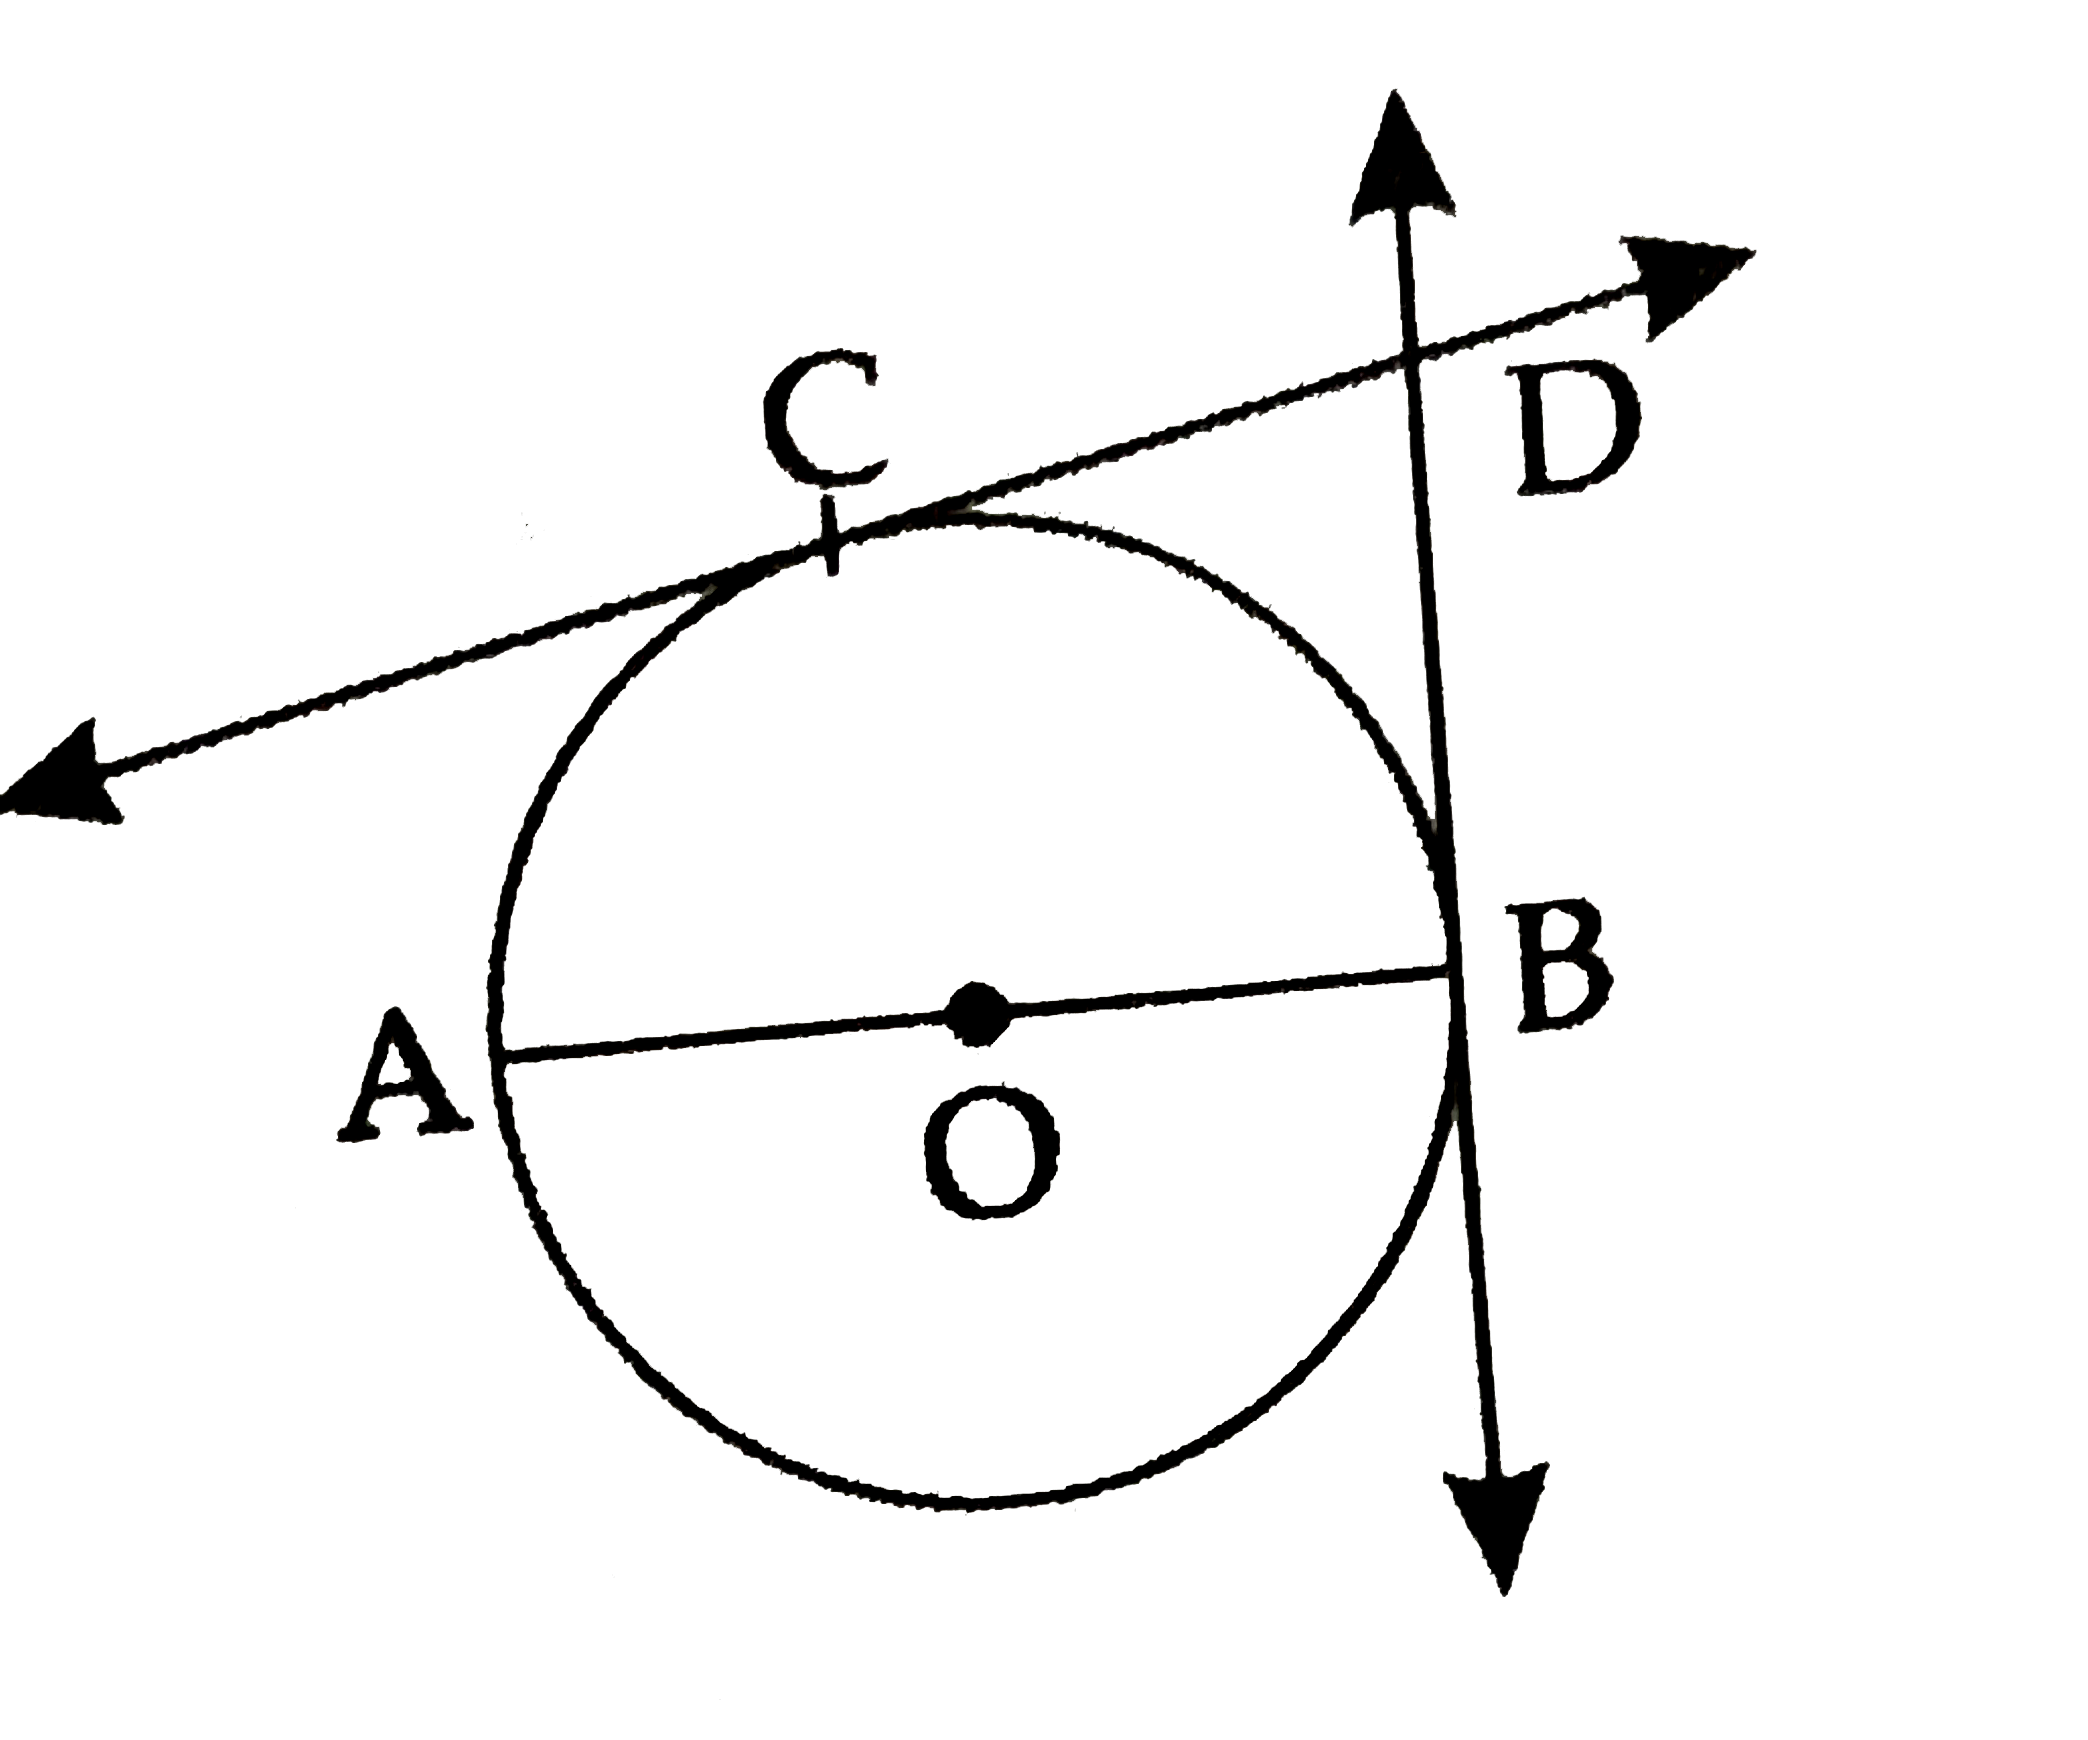 In the adjoining figure, O is the centre and seg AB is a diameter. At  point C on the circle,  the tangent CD is drawn.  Line BD is tangent at B . Prove that seg OD || seg AC.